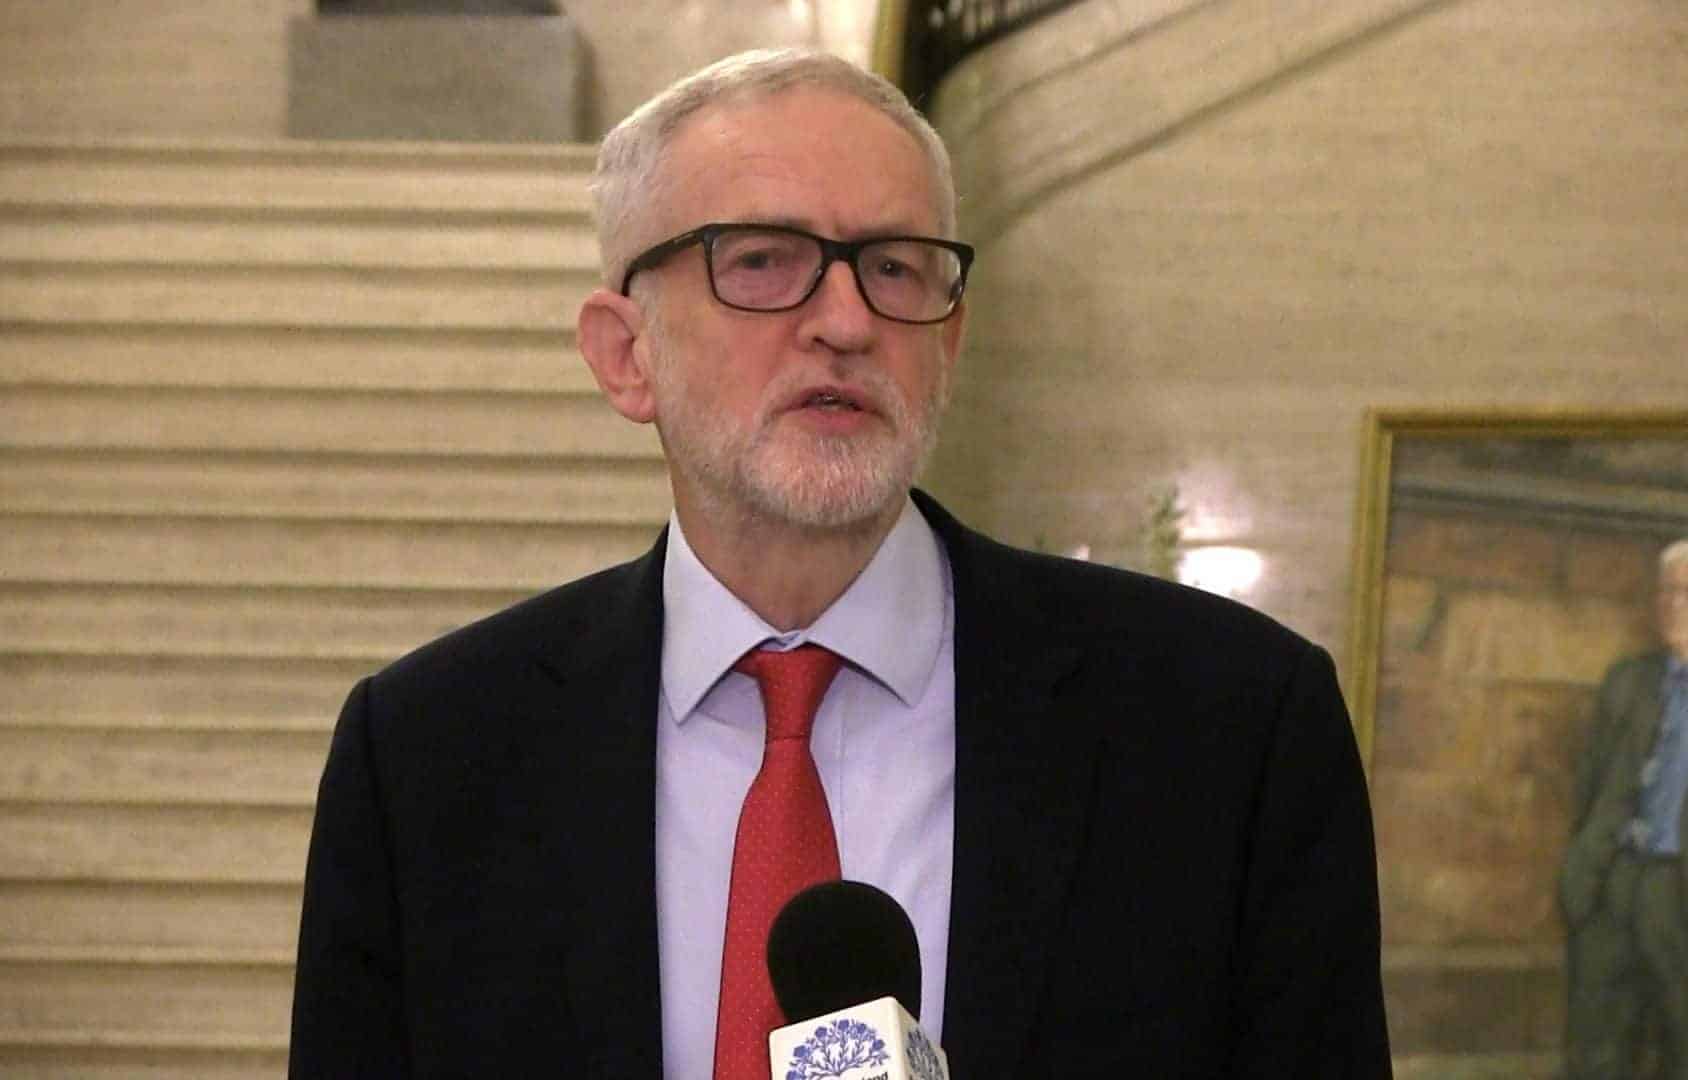 Corbyn condemns Johnson for not visiting flood-hit communities